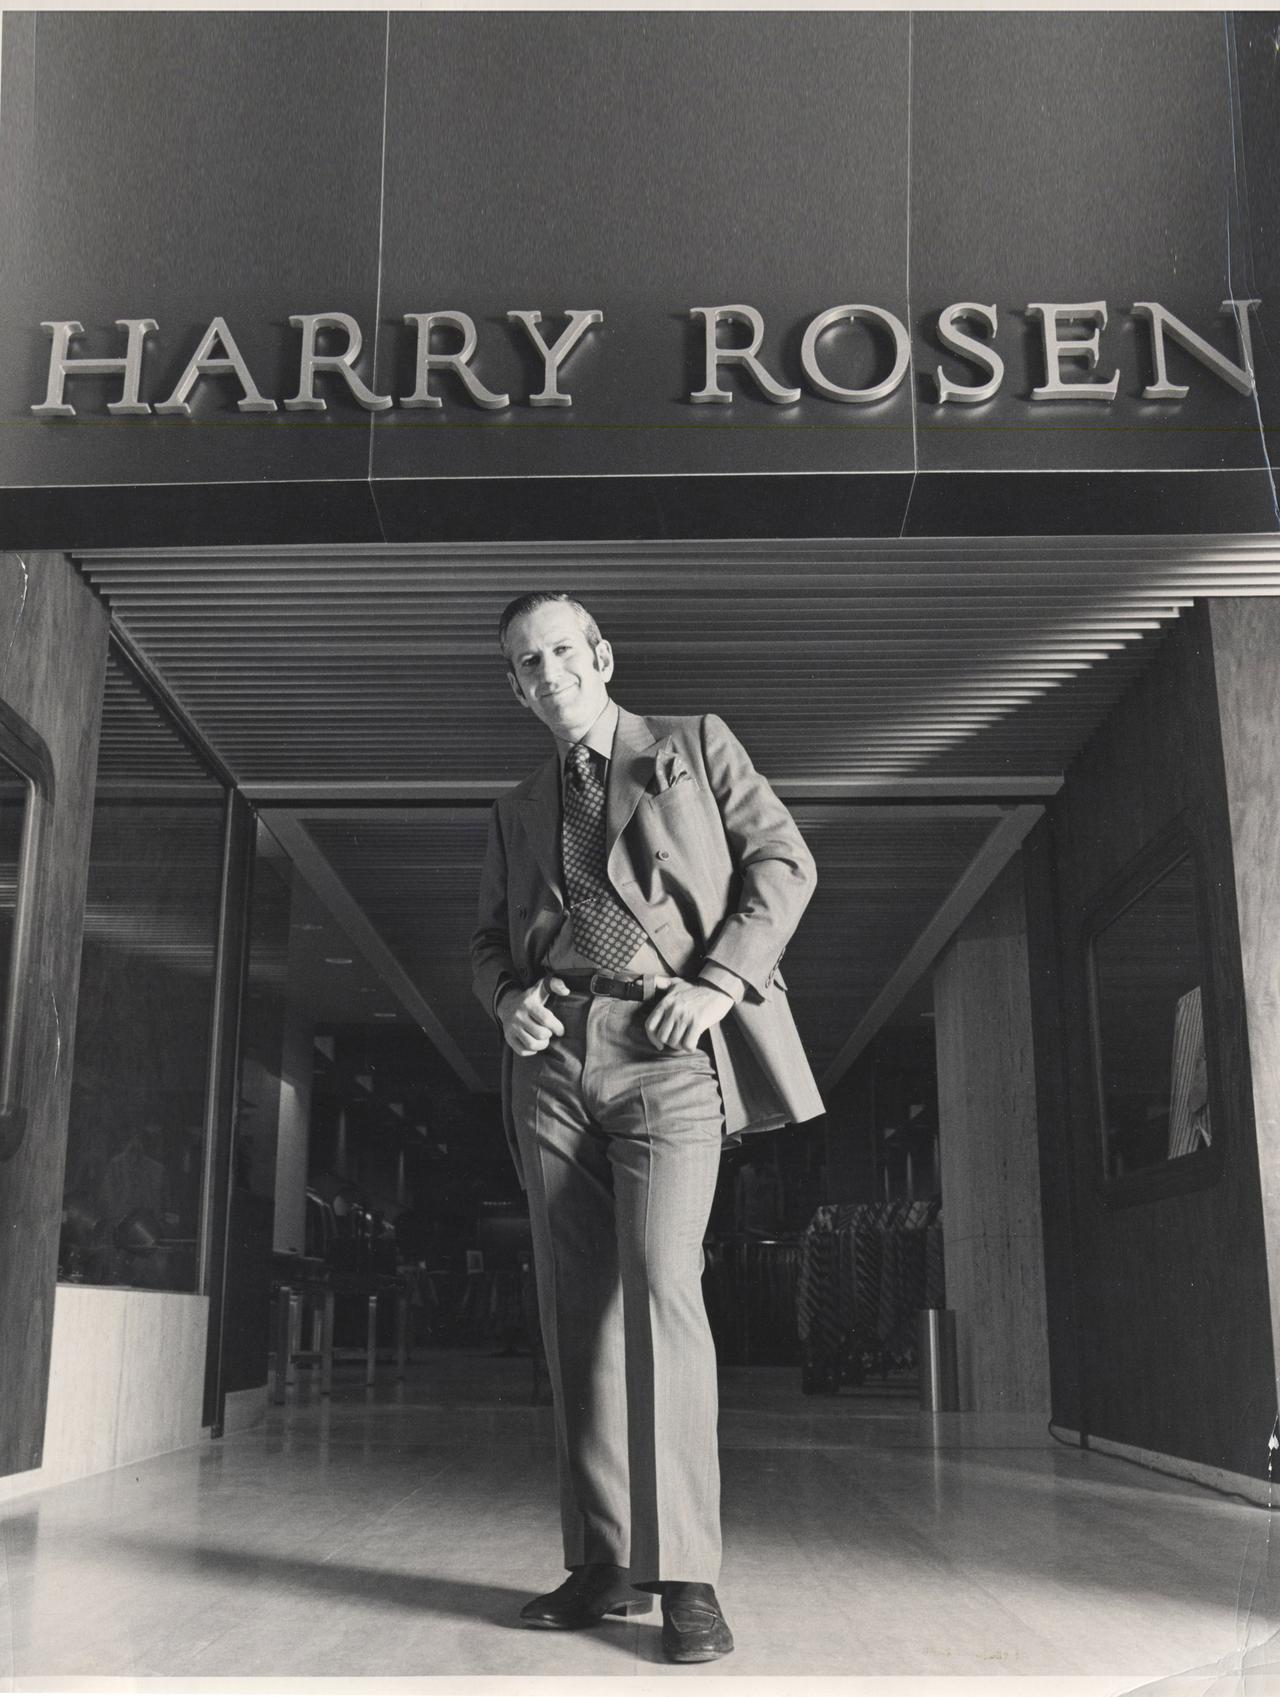 Harry stands in front of our Yorkdale location.